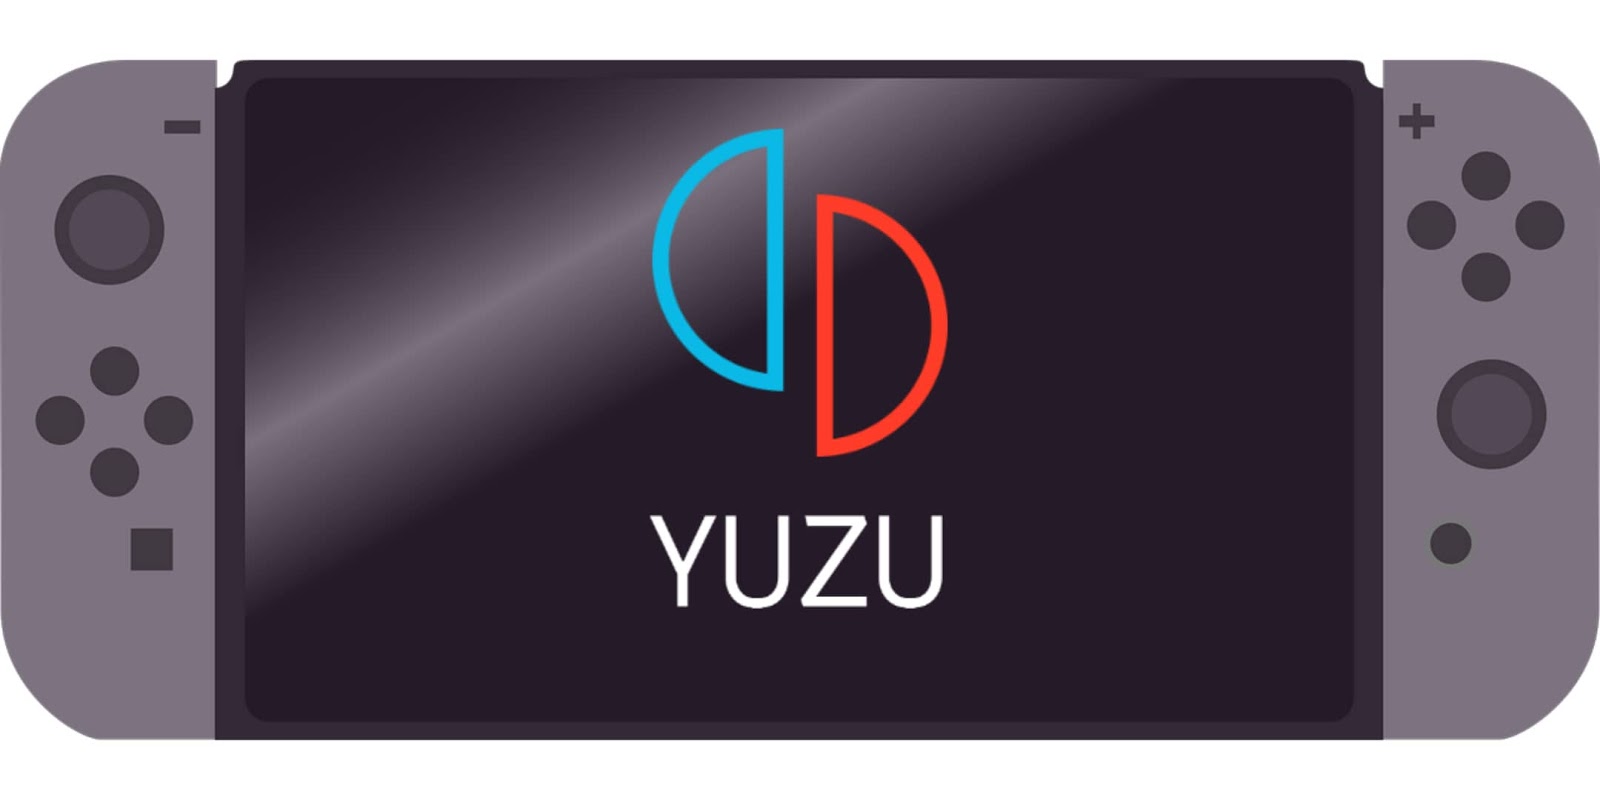 Yuzu The Switch Emulator For Pc Complete Guide